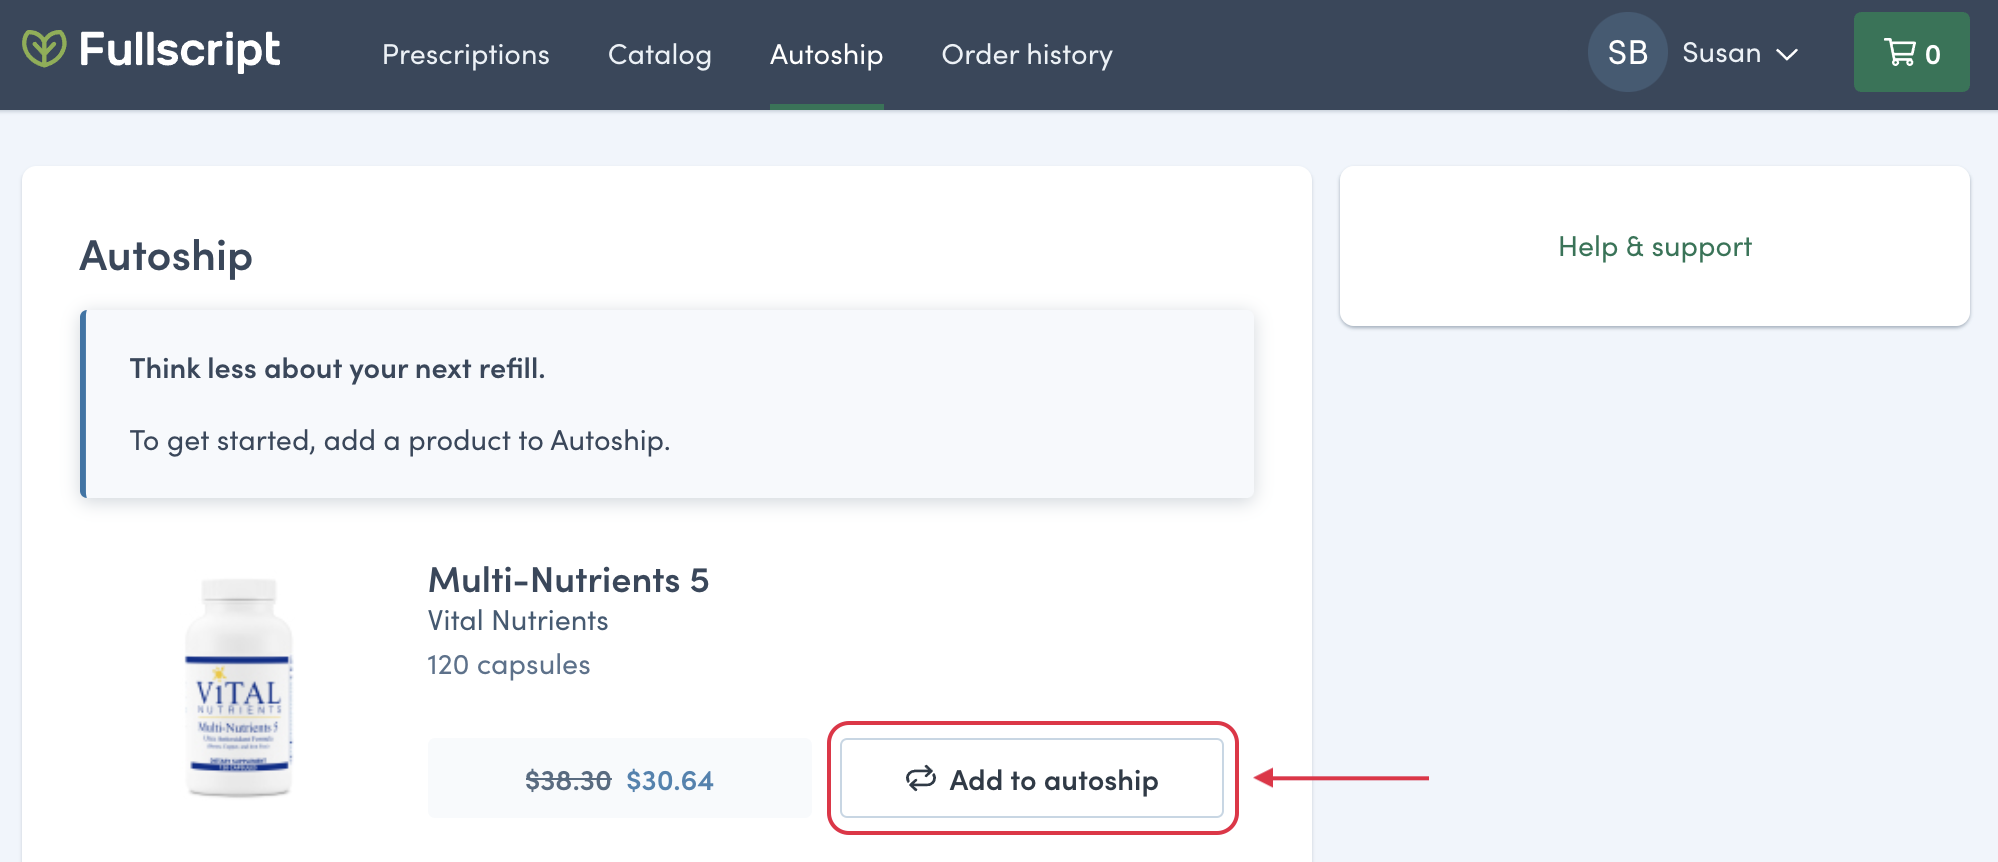 Adding a product to autoship from the Autoship page accessible from the patient menu.